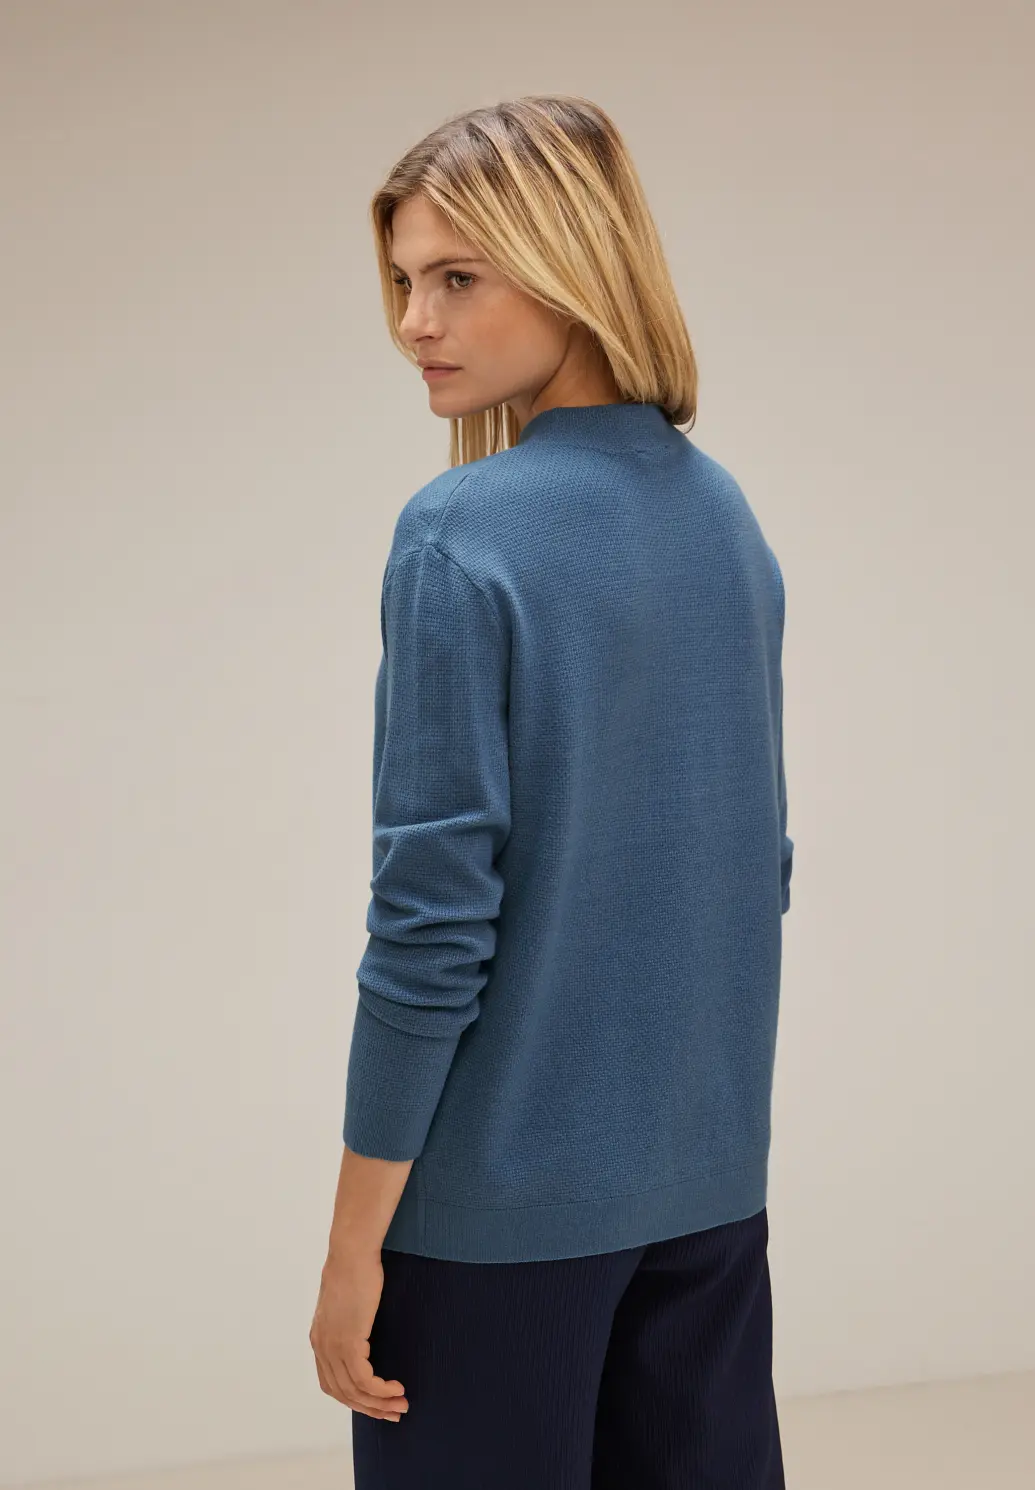 Cotton Blue Structure - - | Satin Melange with Jumper One Blues Knit Street